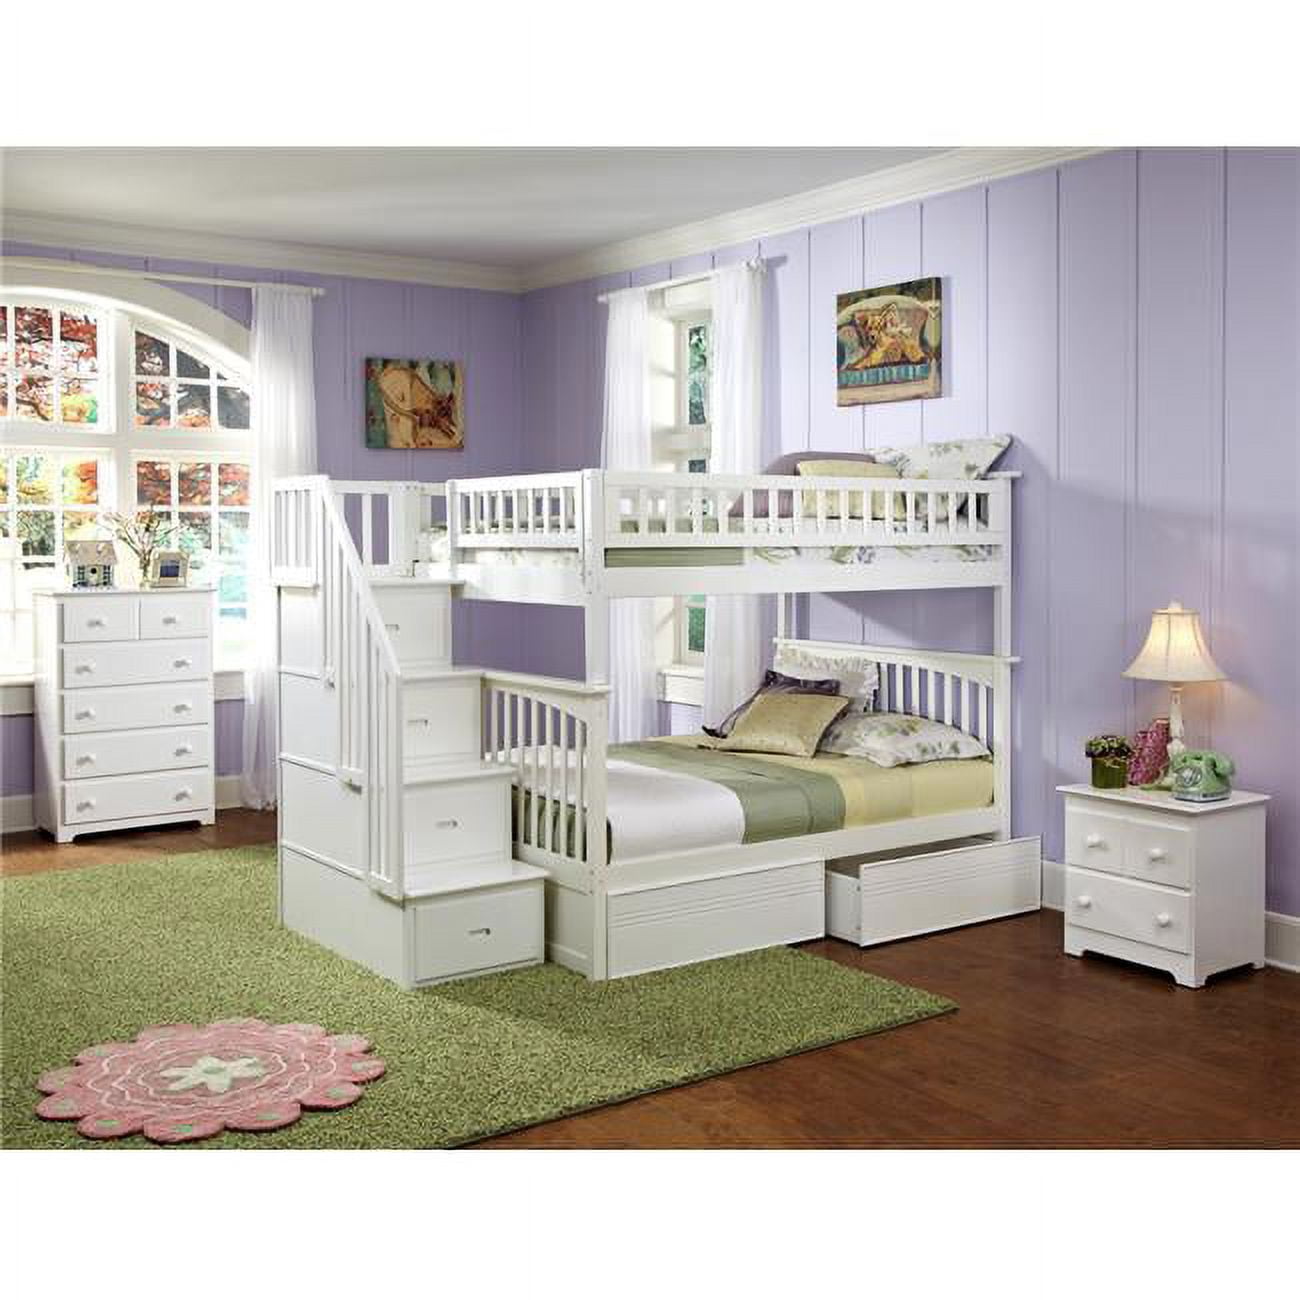 Ab55842 Columbia Staircase Bunkbed With Urban Bed Drawers - White, Full Over Full Size